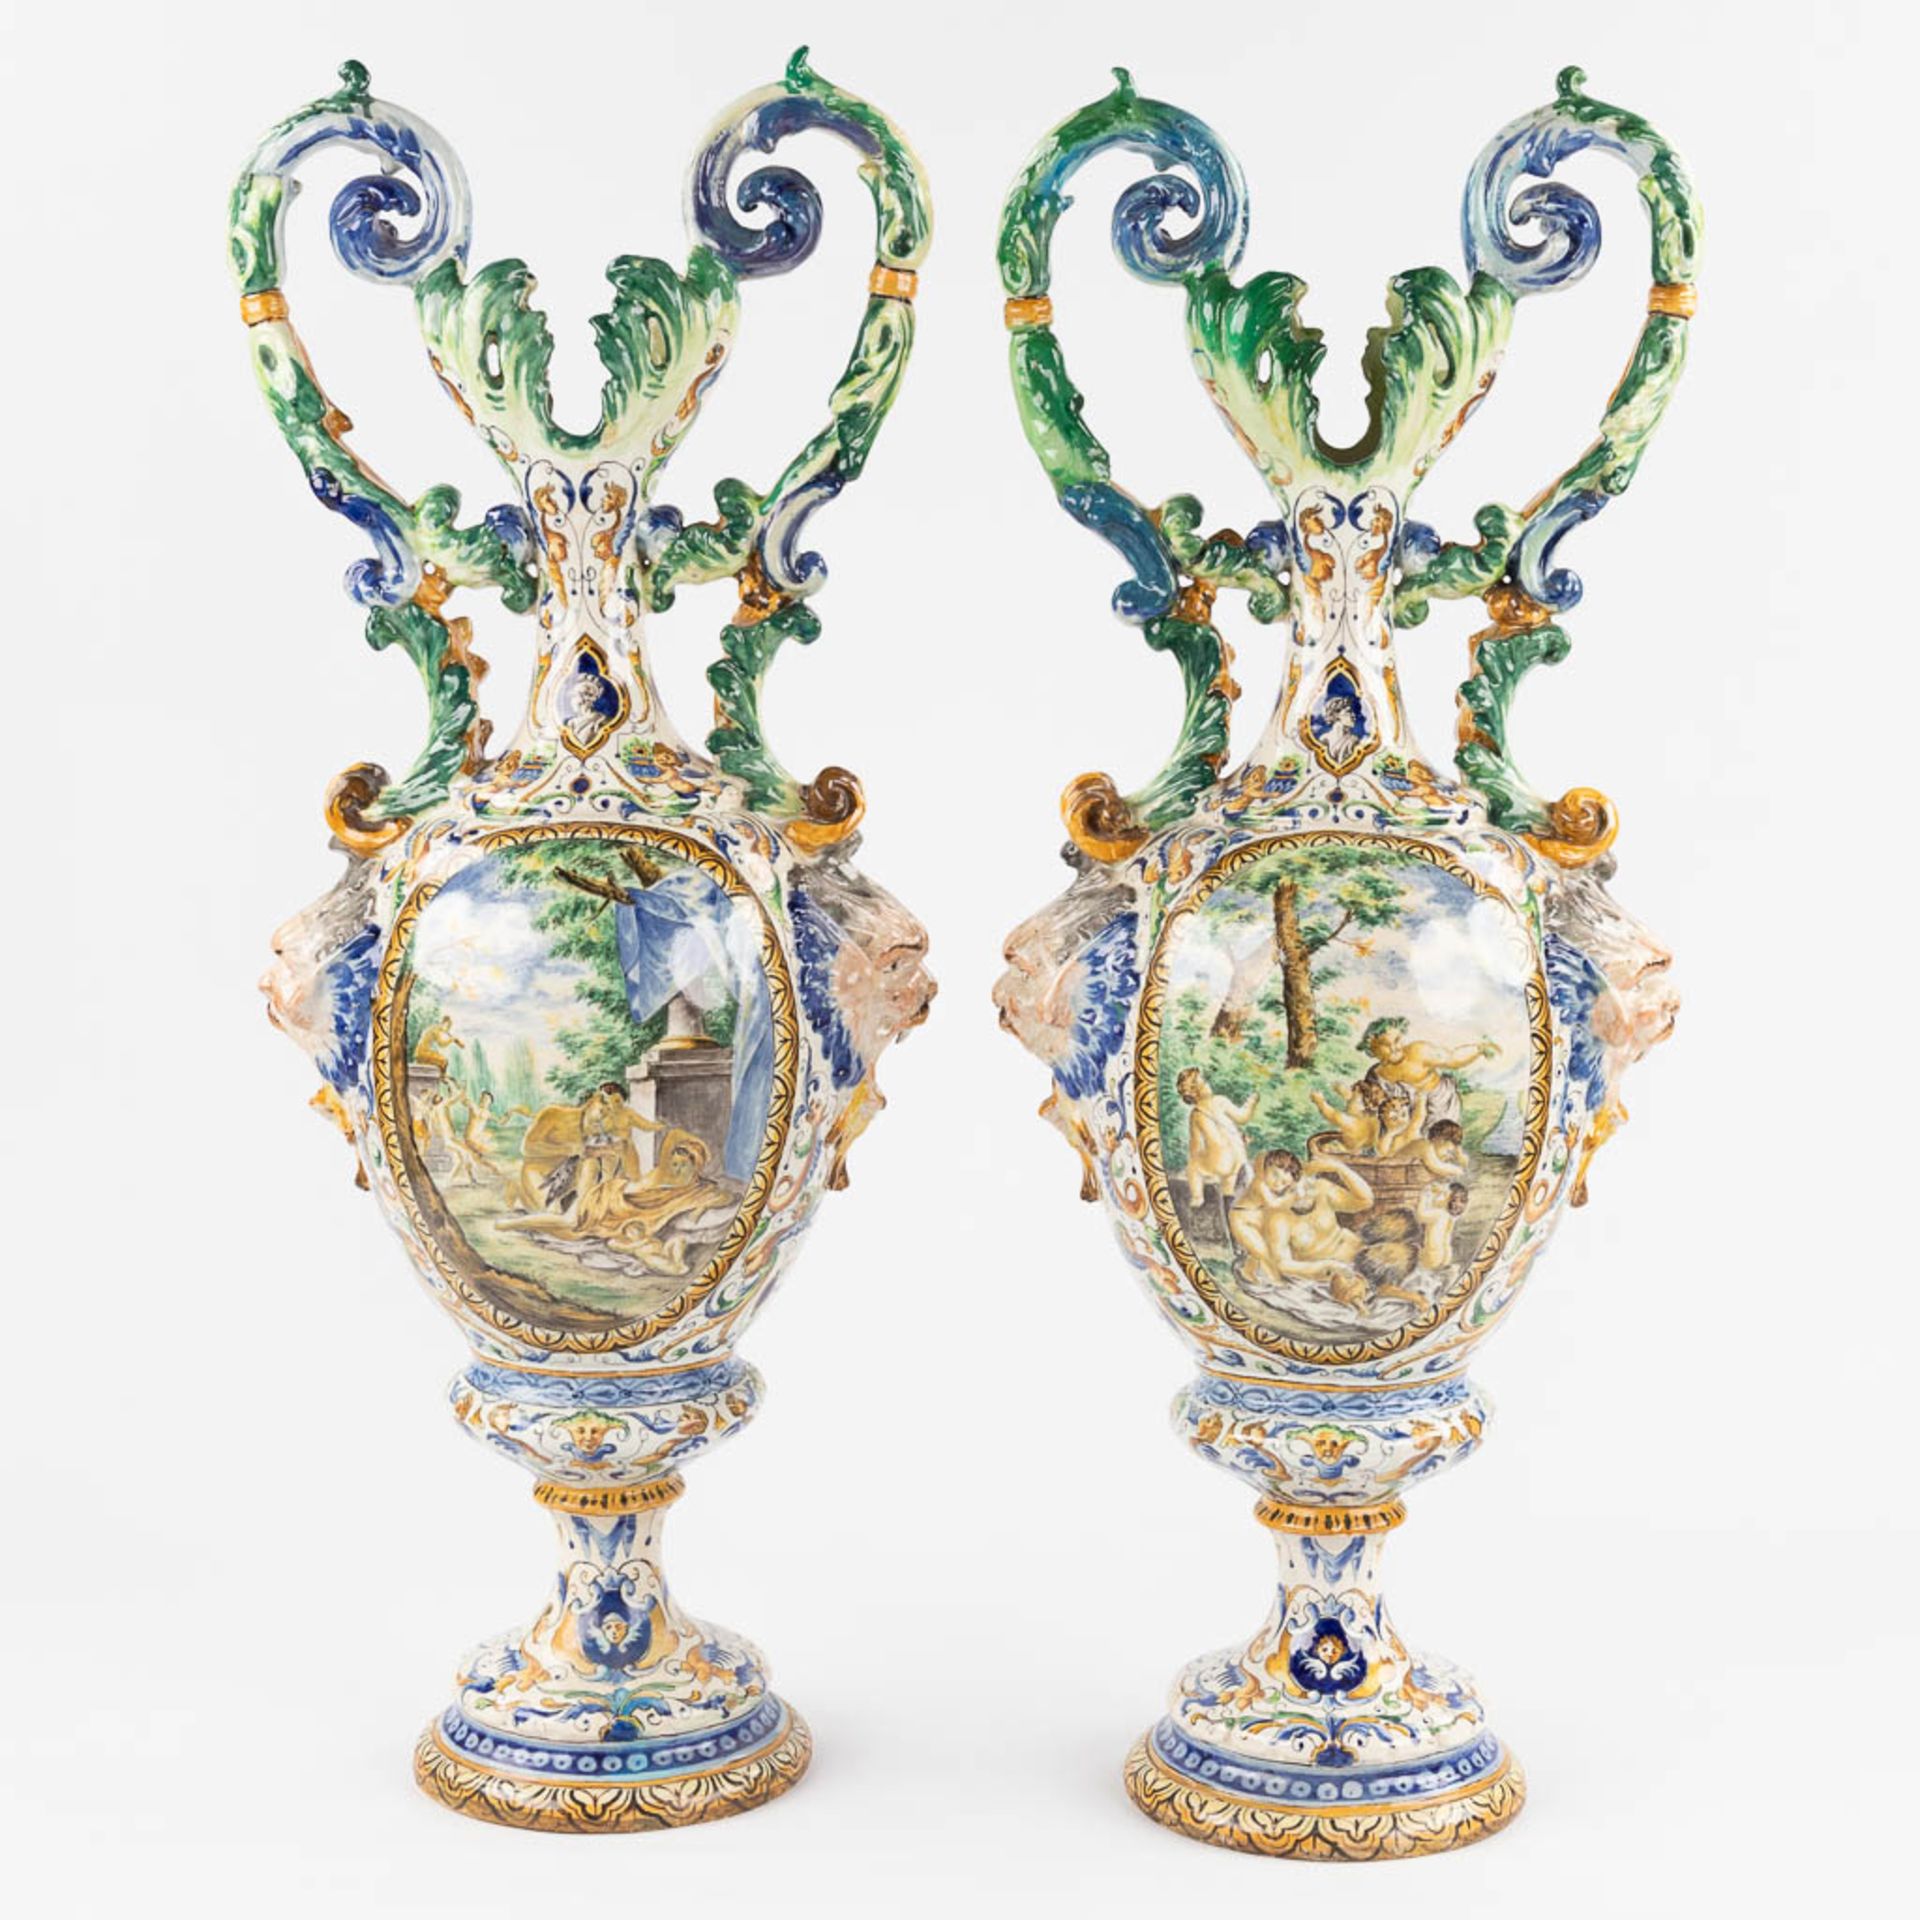 A pair of large vases, Italian Renaissance style, glazed faience. 20th C. (D:45 x W:45 x H:205 cm) - Image 5 of 31